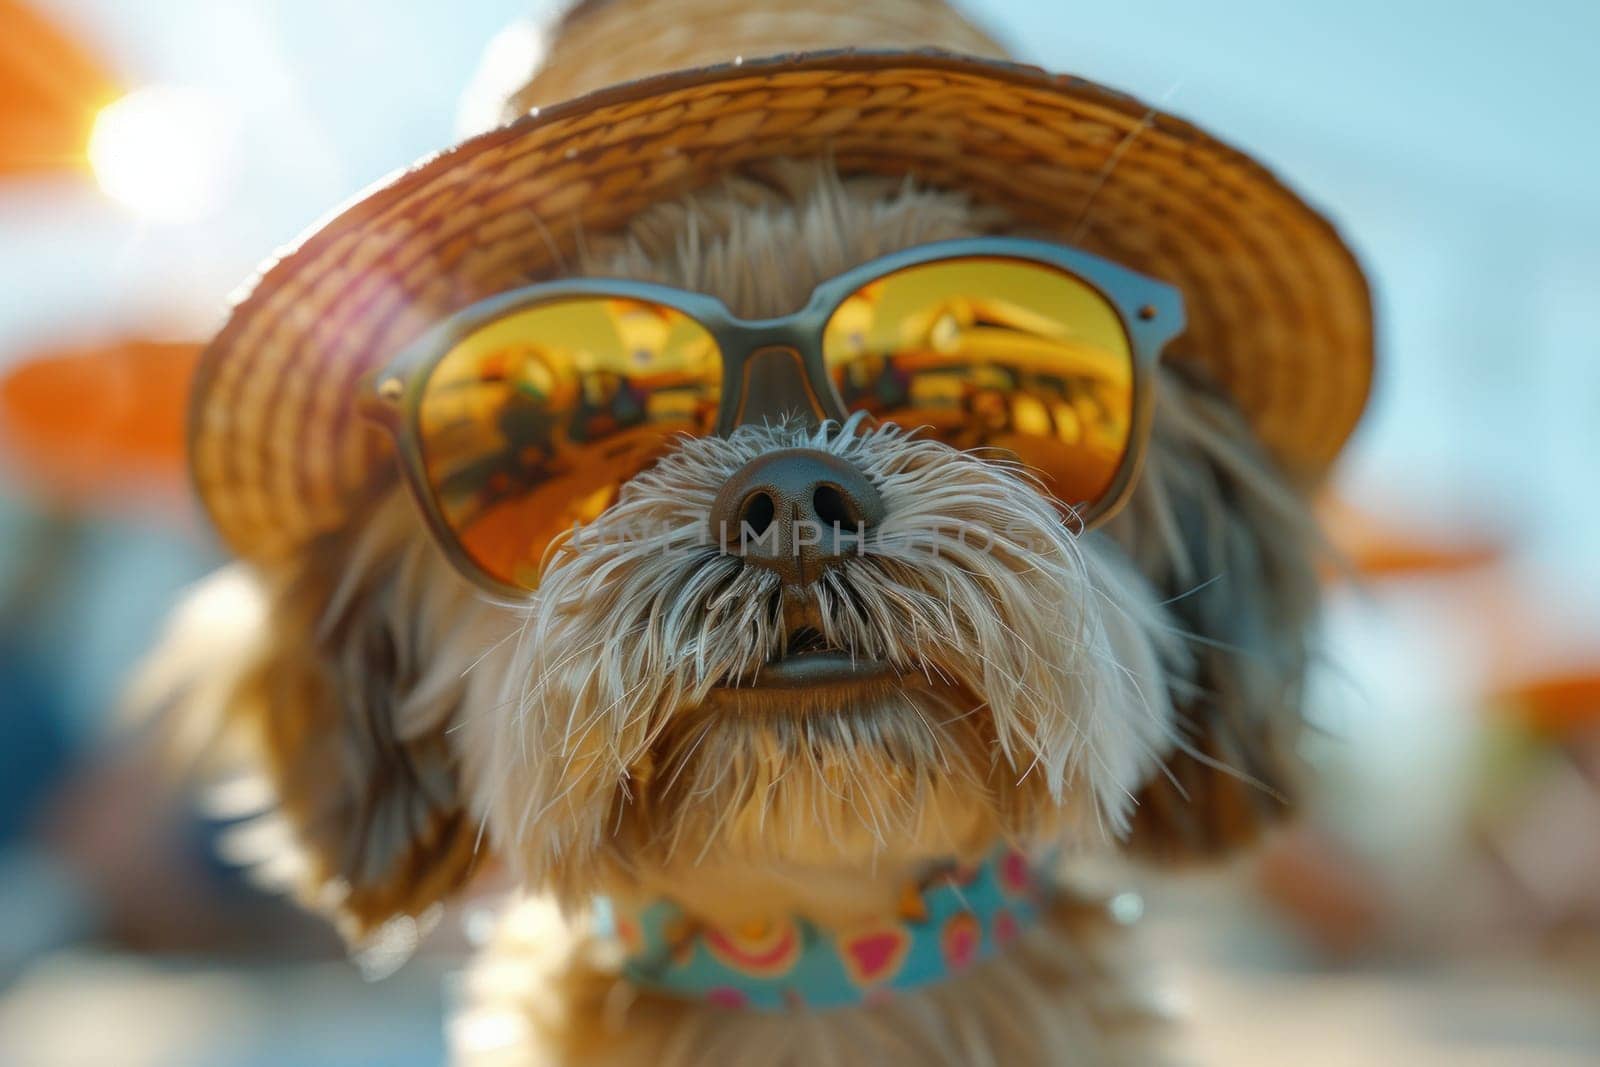 A small dog wearing sunglasses and a straw hat.